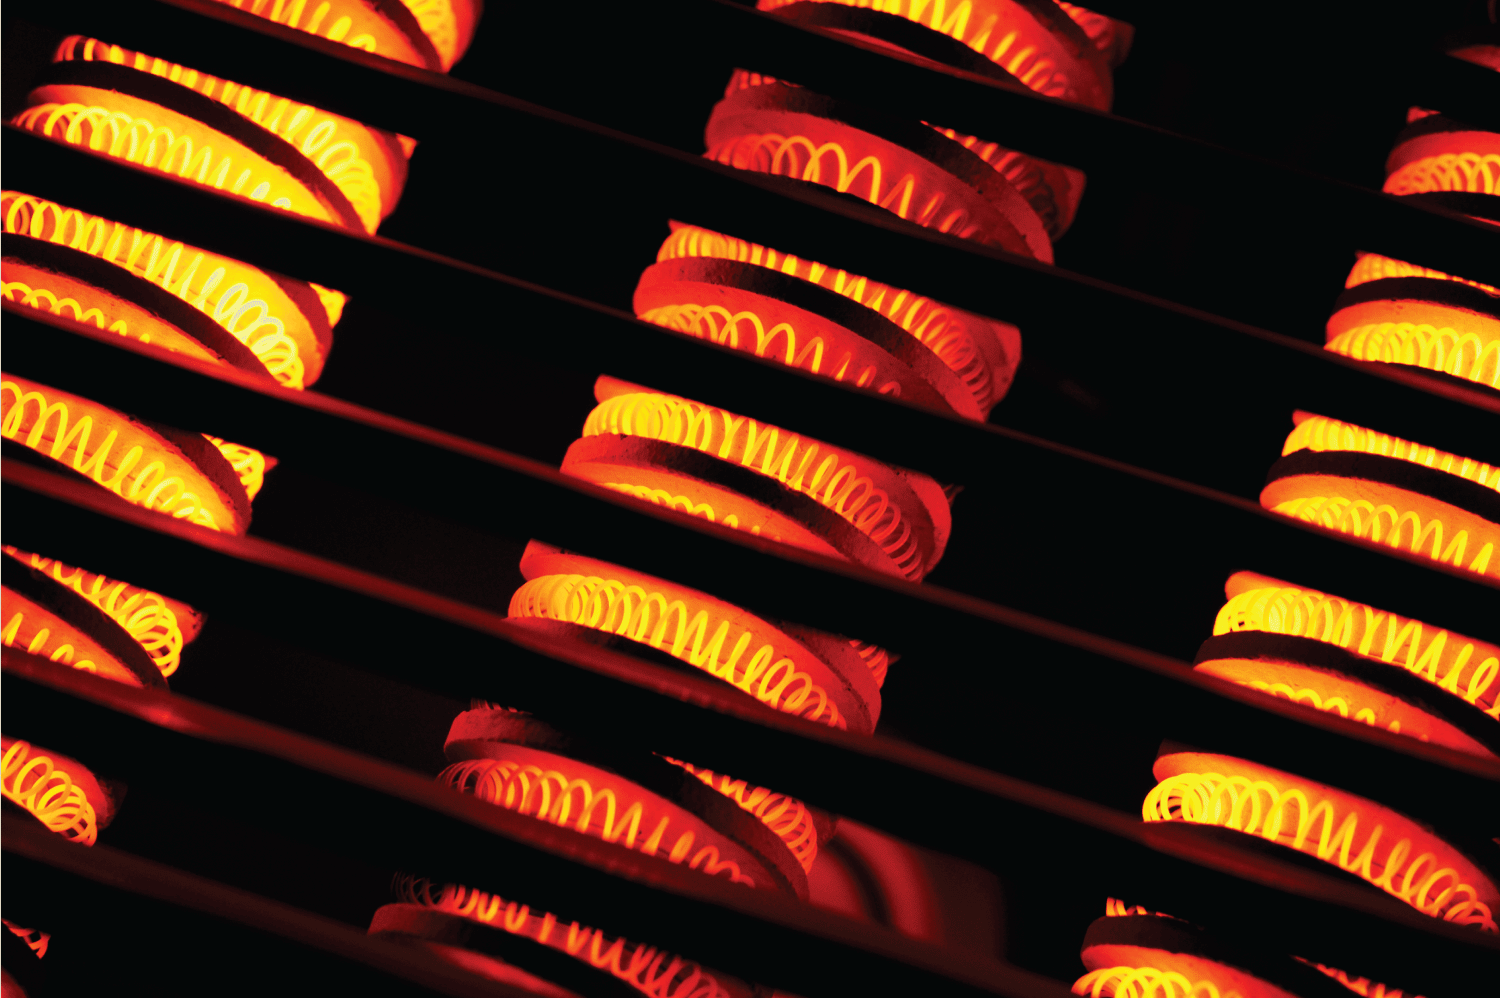 glowing electric heating coils of a home heating system